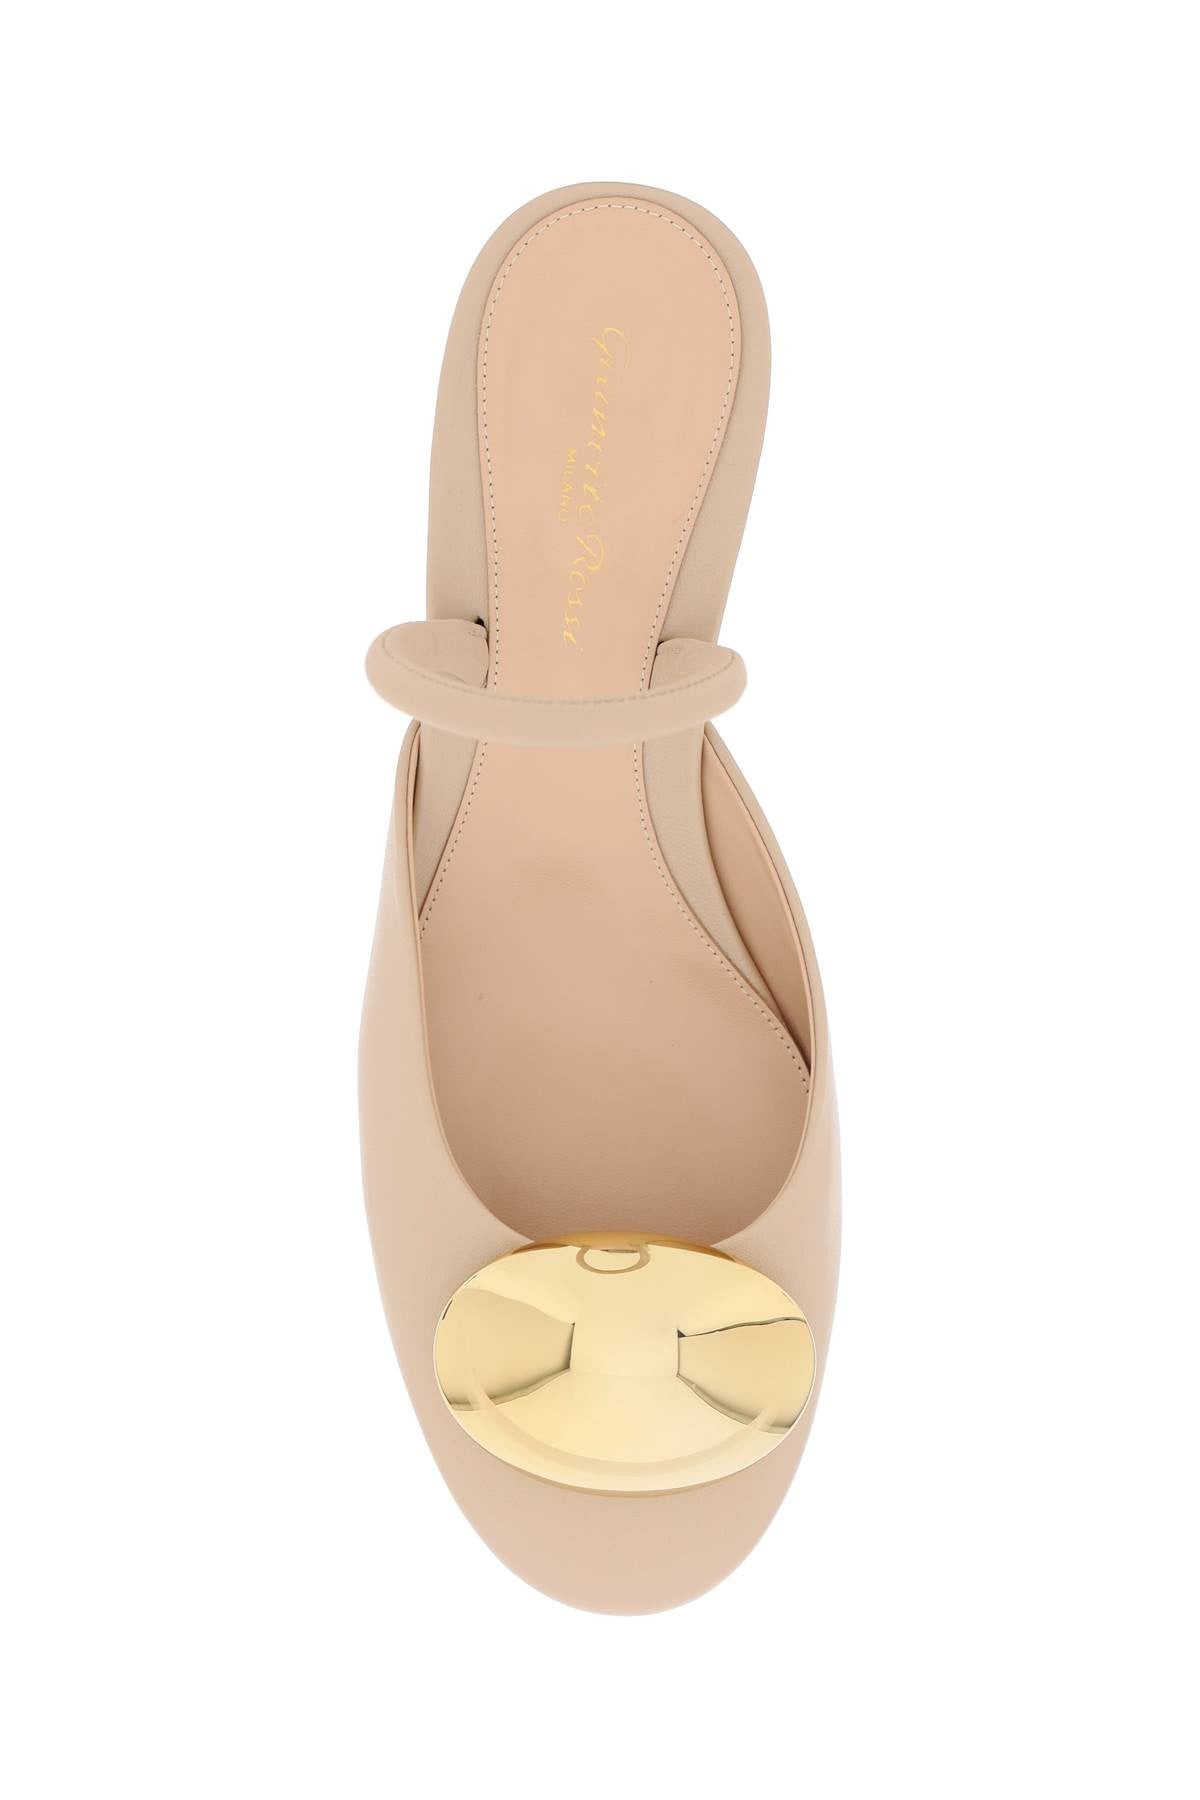 Gianvito rossi slingback décollet-women > shoes > pumps-Gianvito Rossi-Urbanheer